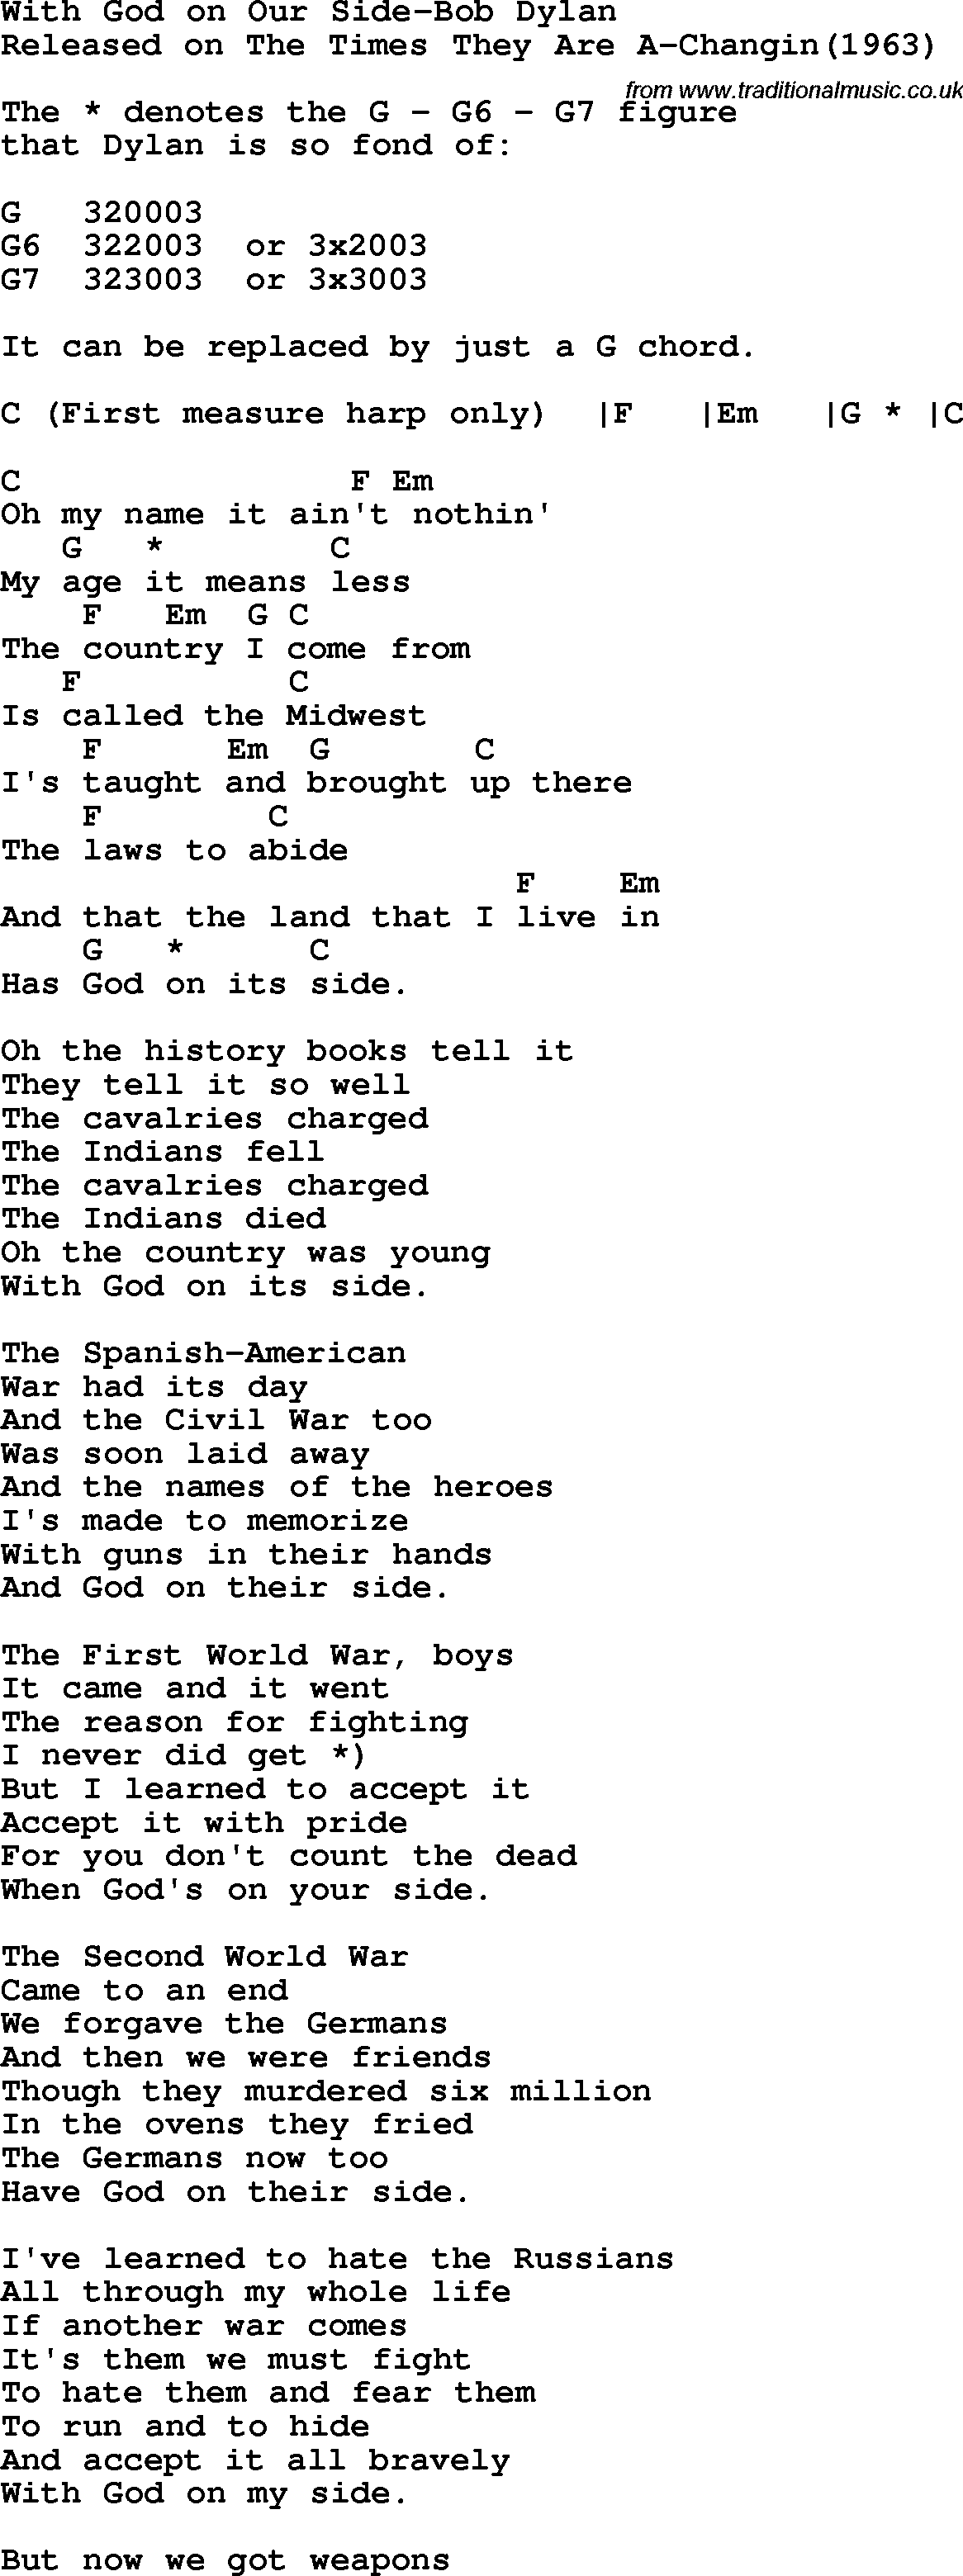 Protest Song With God On Our Side-Bob Dylan lyrics and chords